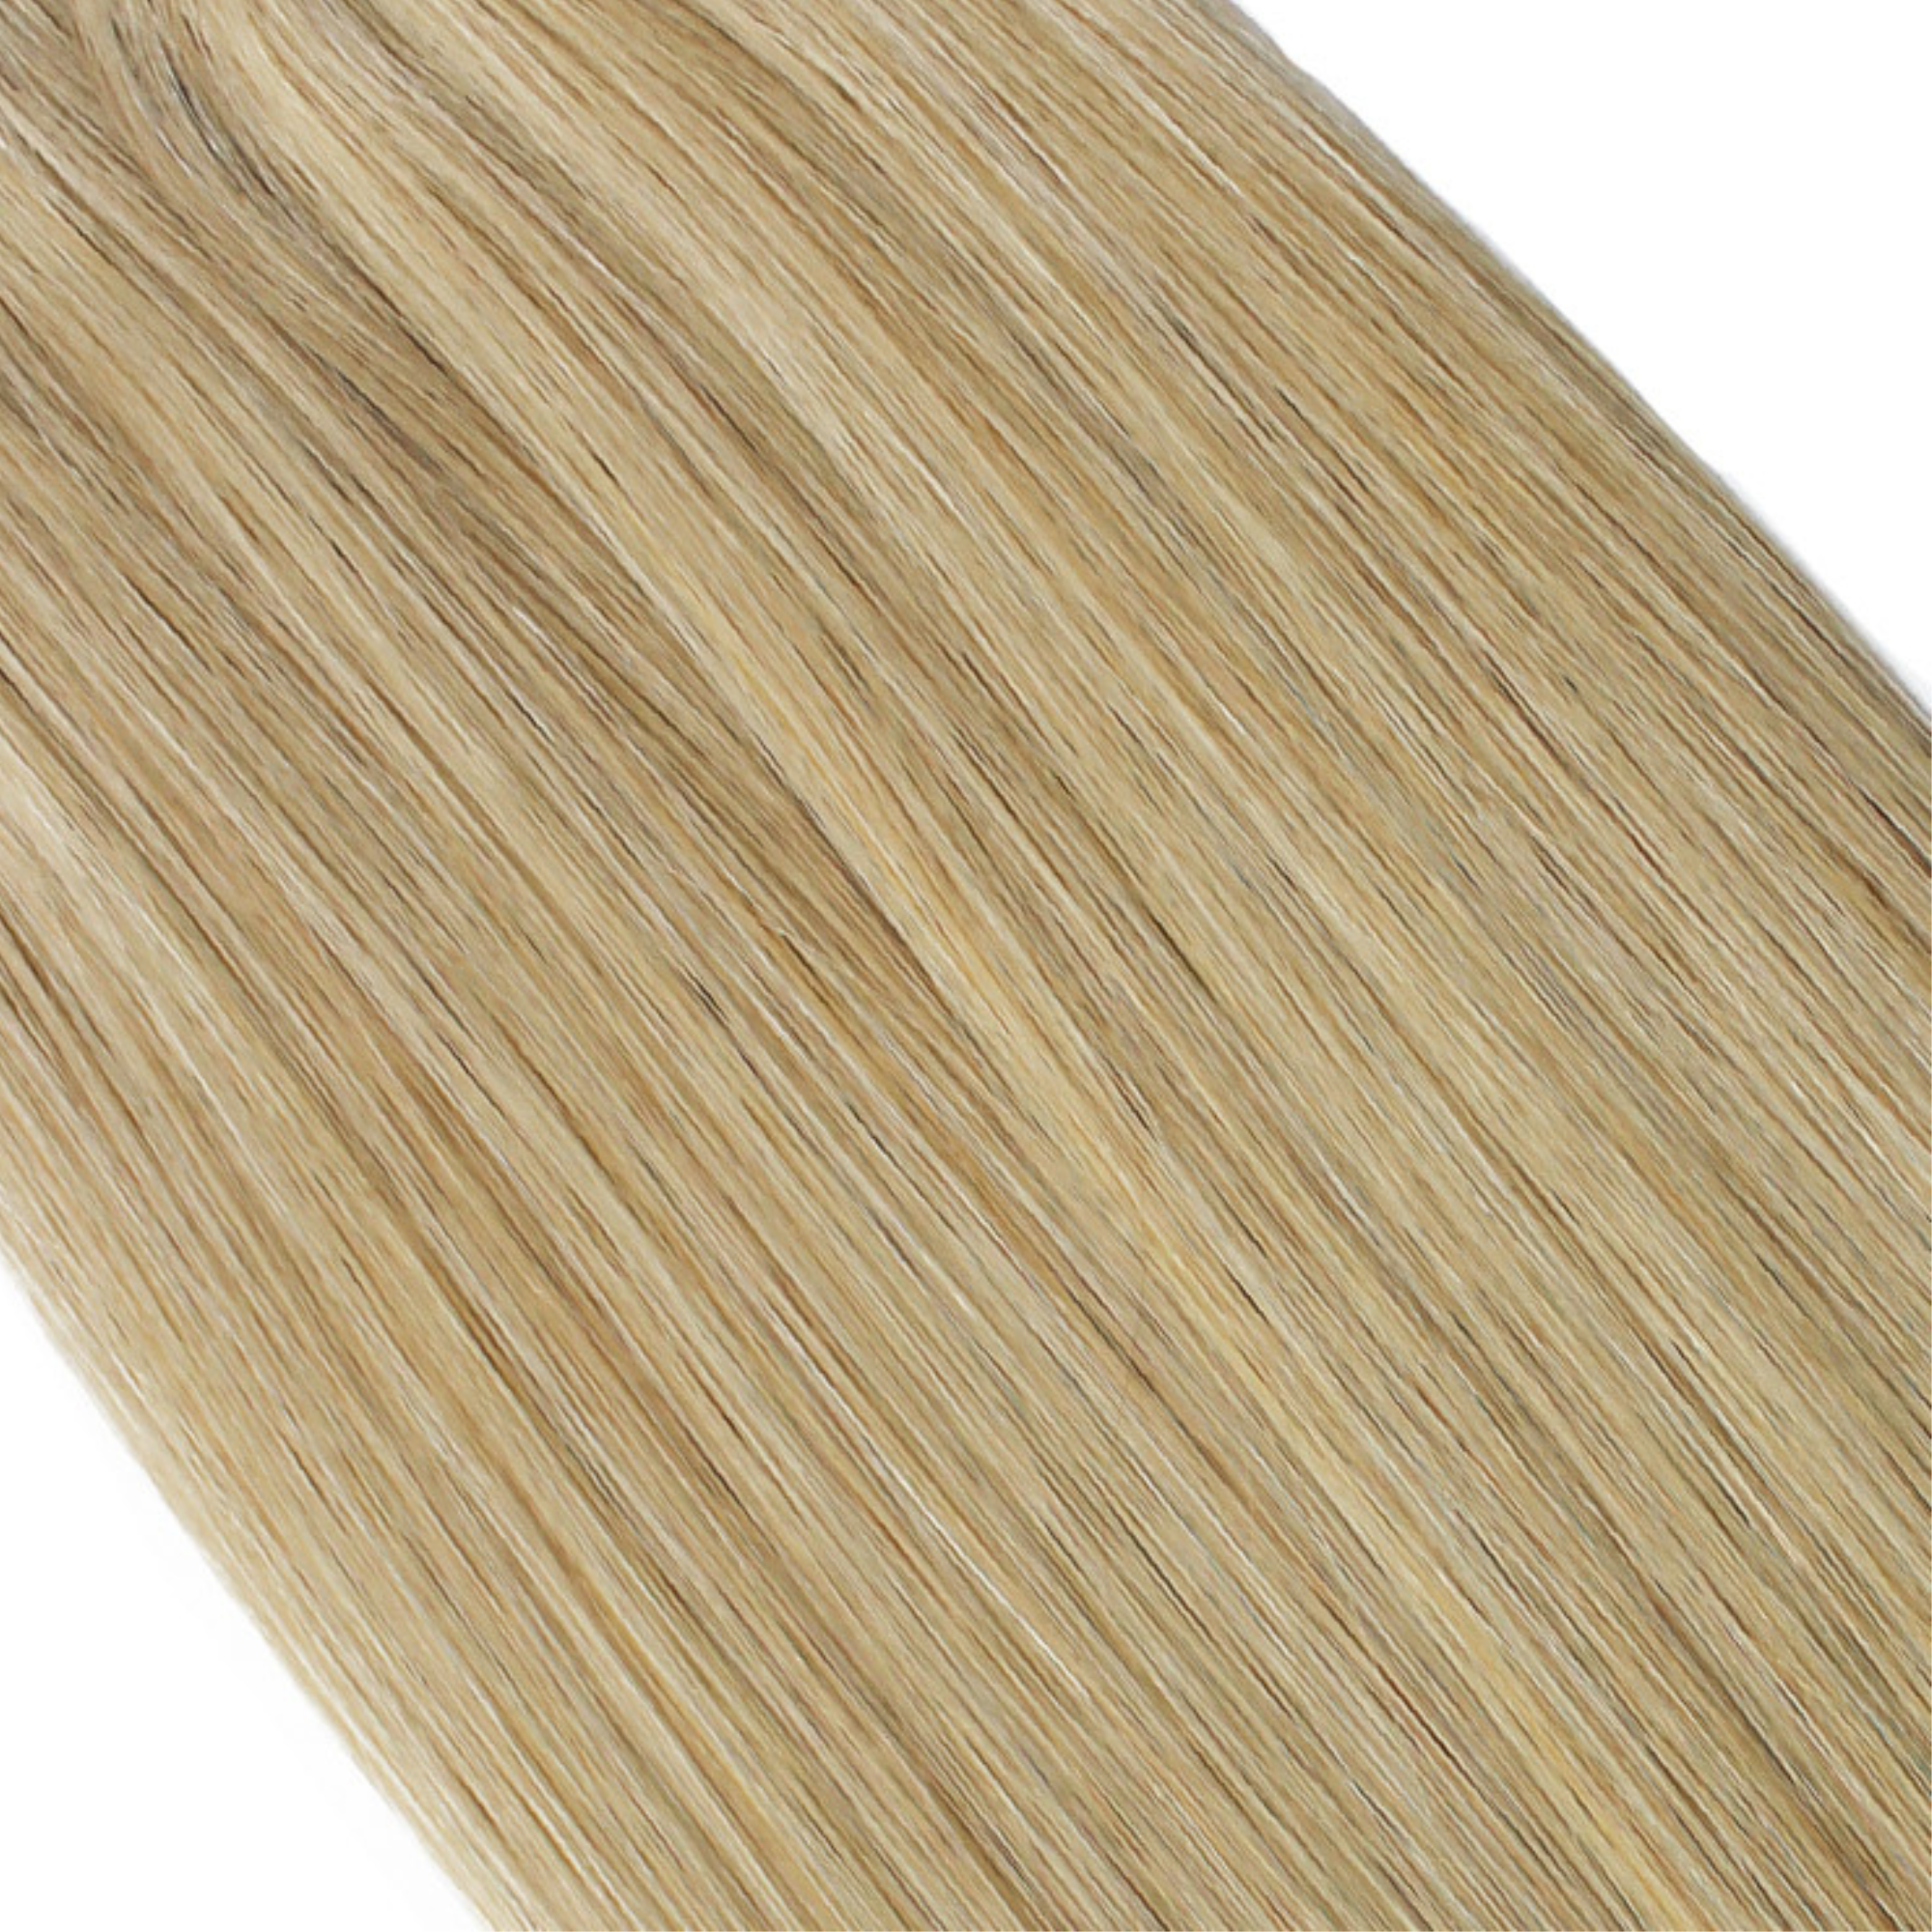 "hair rehab london 22" tape hair extensions shade swatch titled dirty blonde"